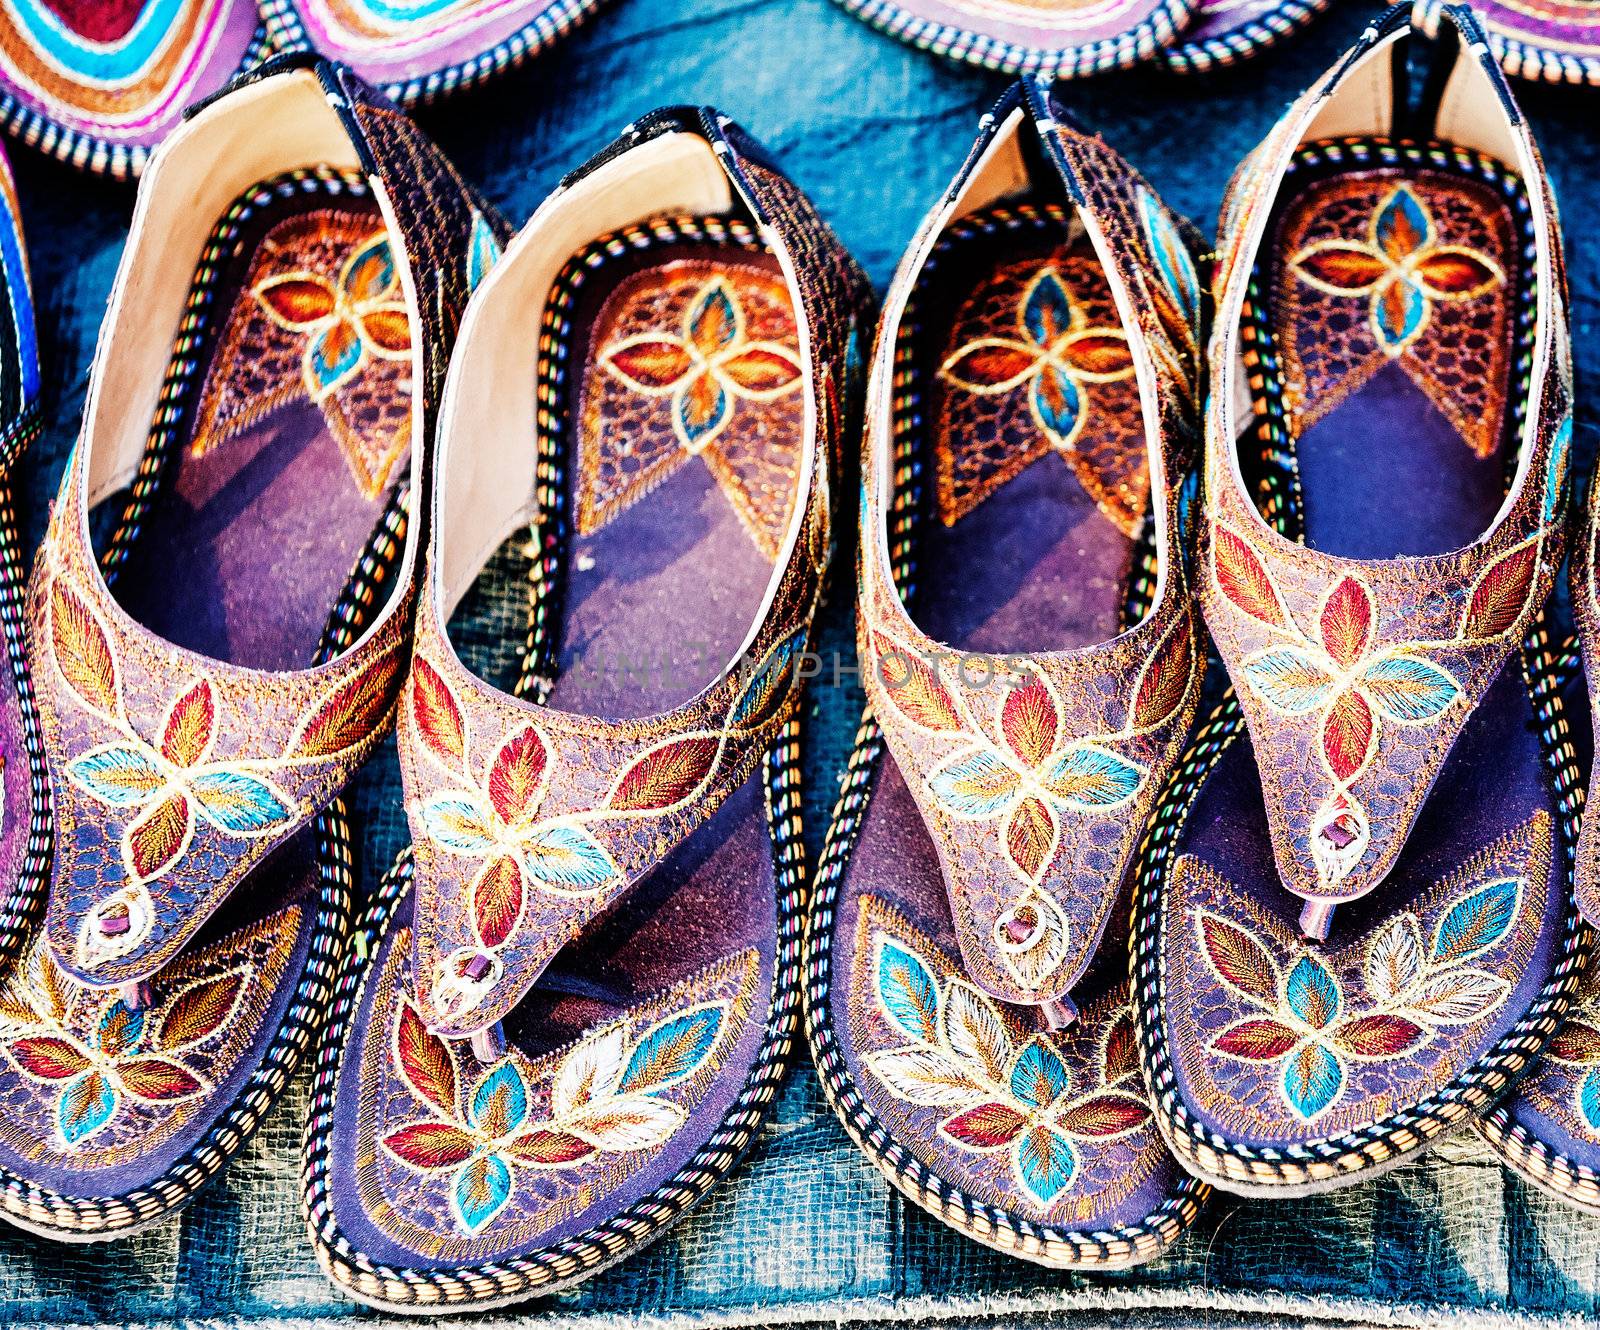 Traditional women's shoes in the local market in India by vladimir_sklyarov